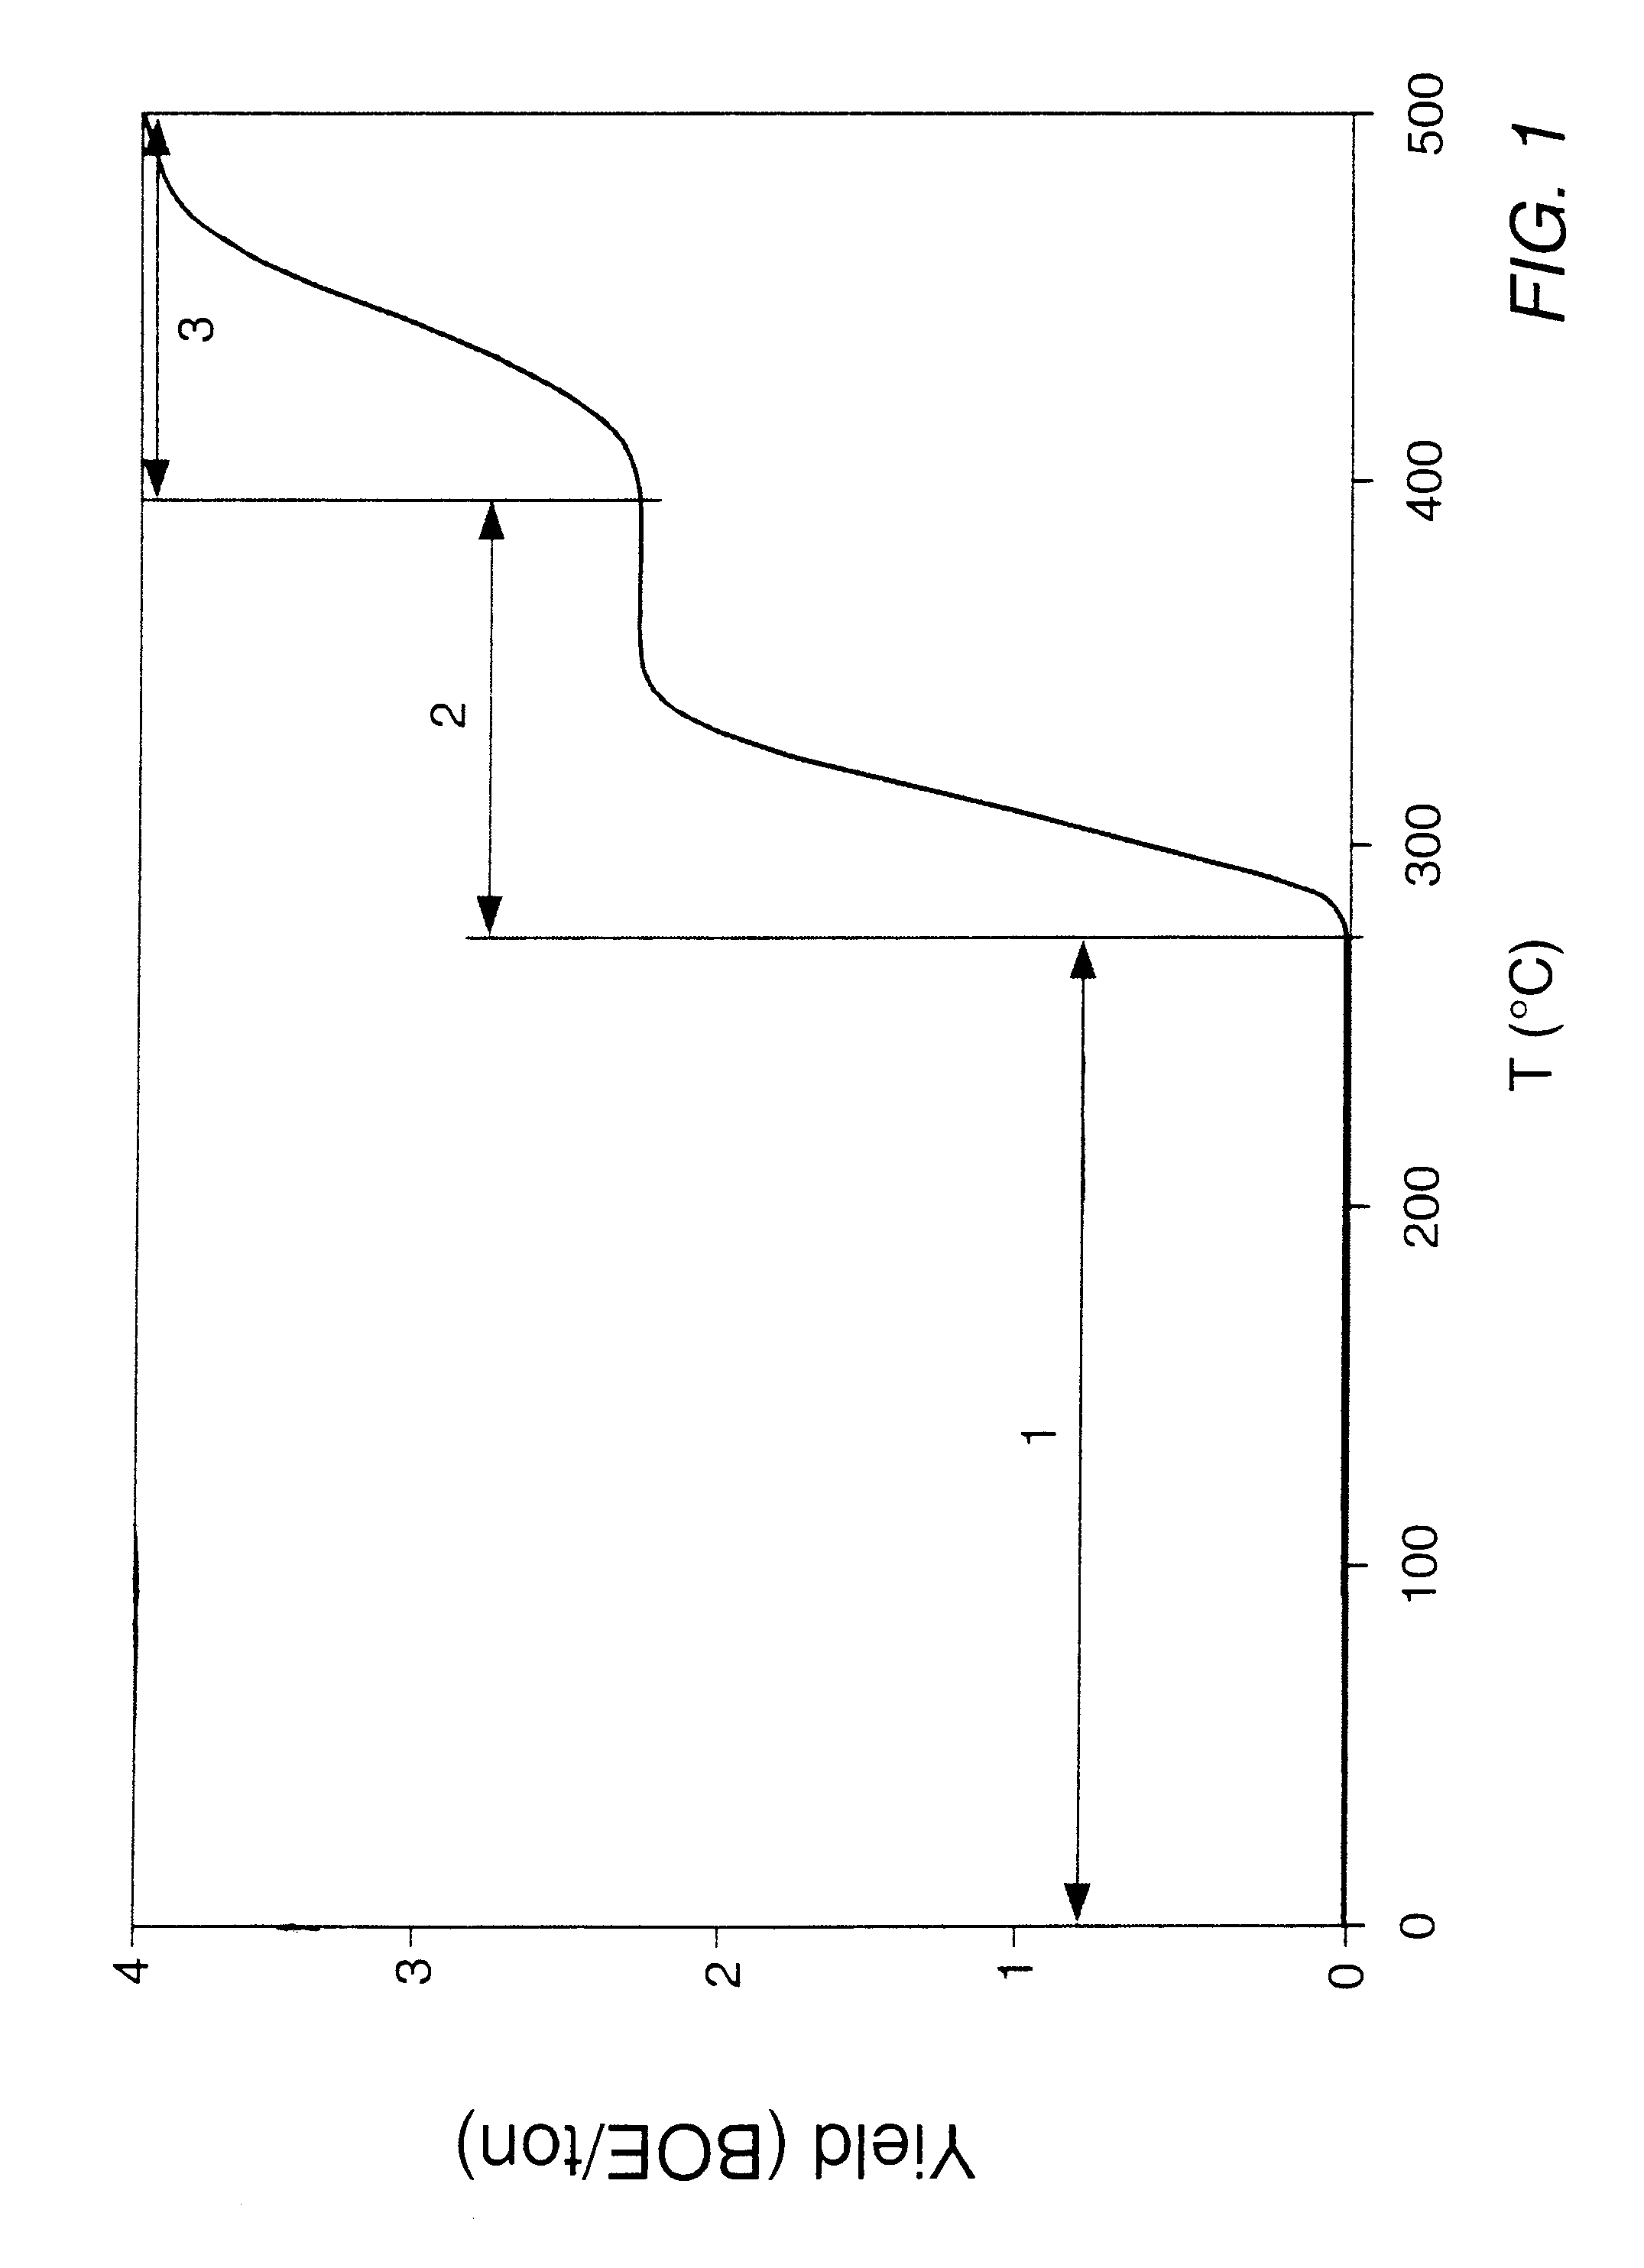 In situ thermal processing of a hydrocarbon containing formation using a controlled heating rate